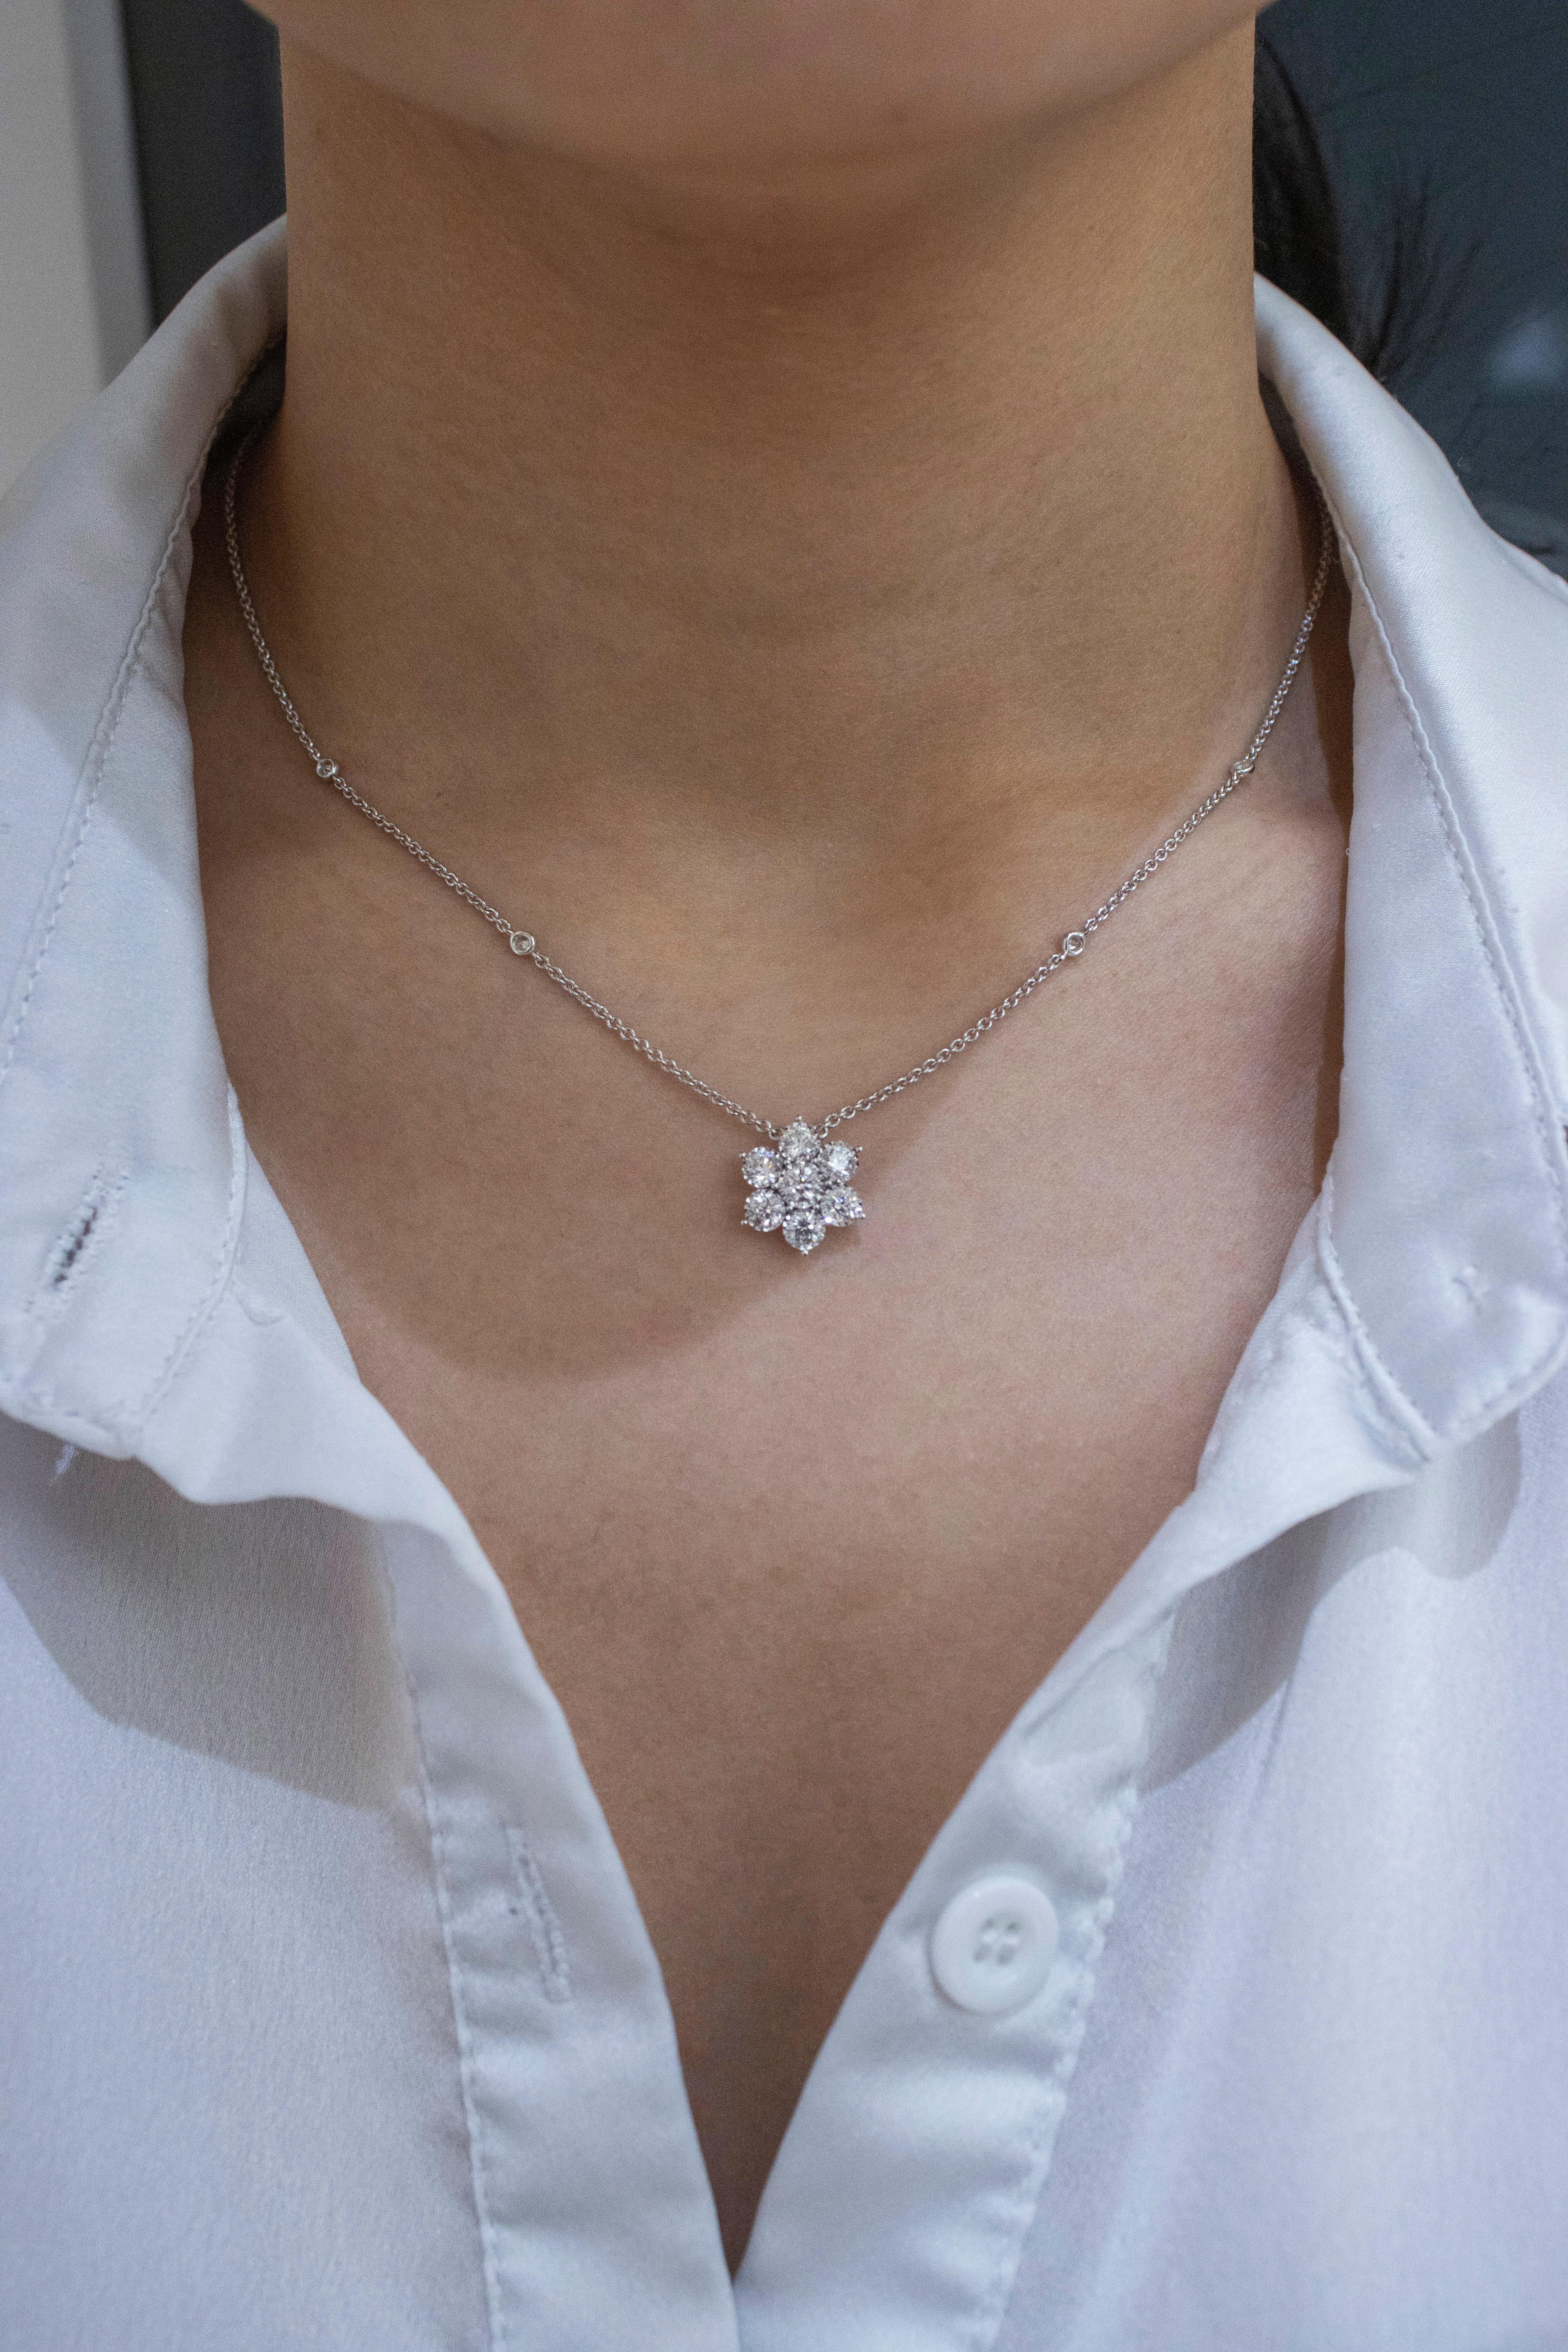 Contemporary Roman Malakov 1.12 carats Total Round Diamond Cluster Flower Pendant Necklace For Sale